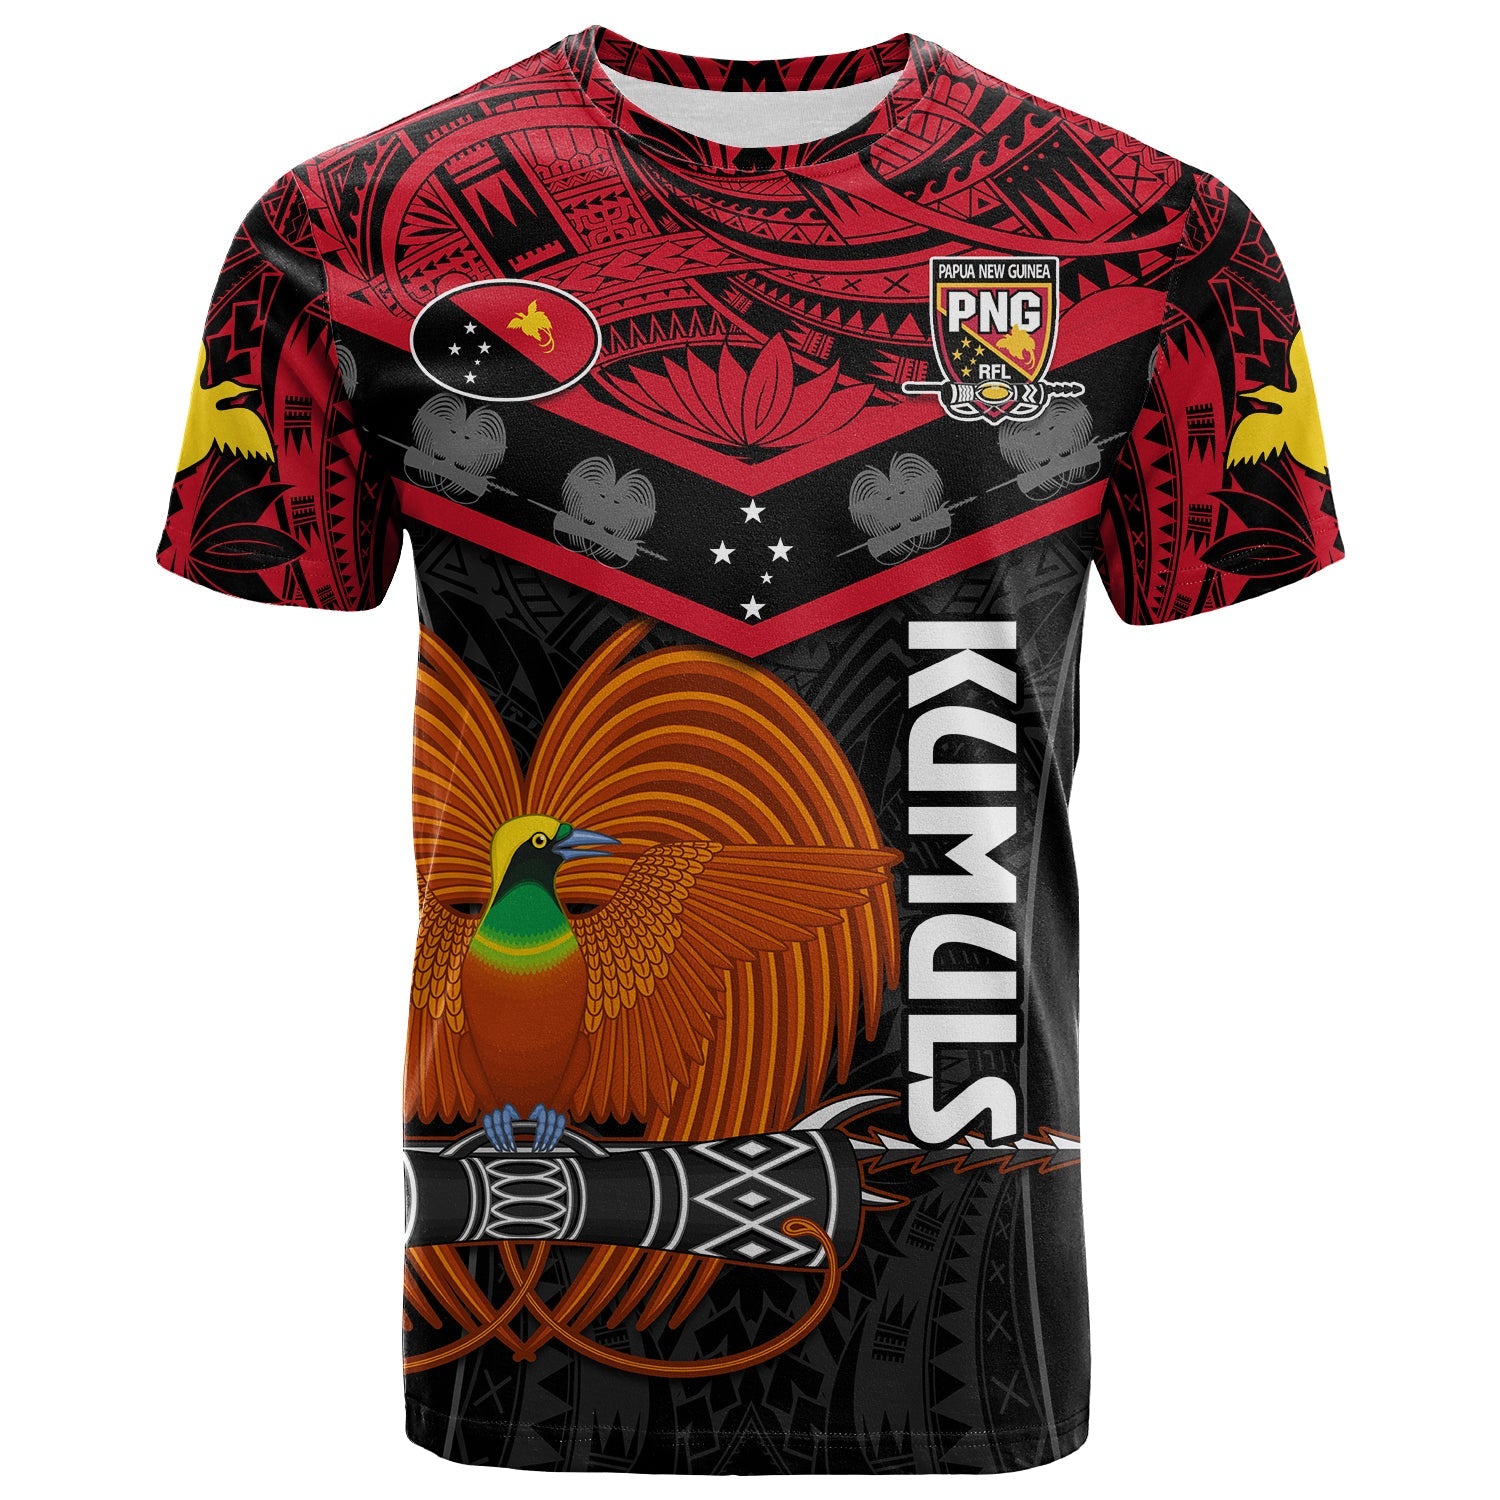 Papua New Guinea Rugby T Shirt PNG Kumuls Bird Of Paradise Black LT14 Adult Black - Polynesian Pride